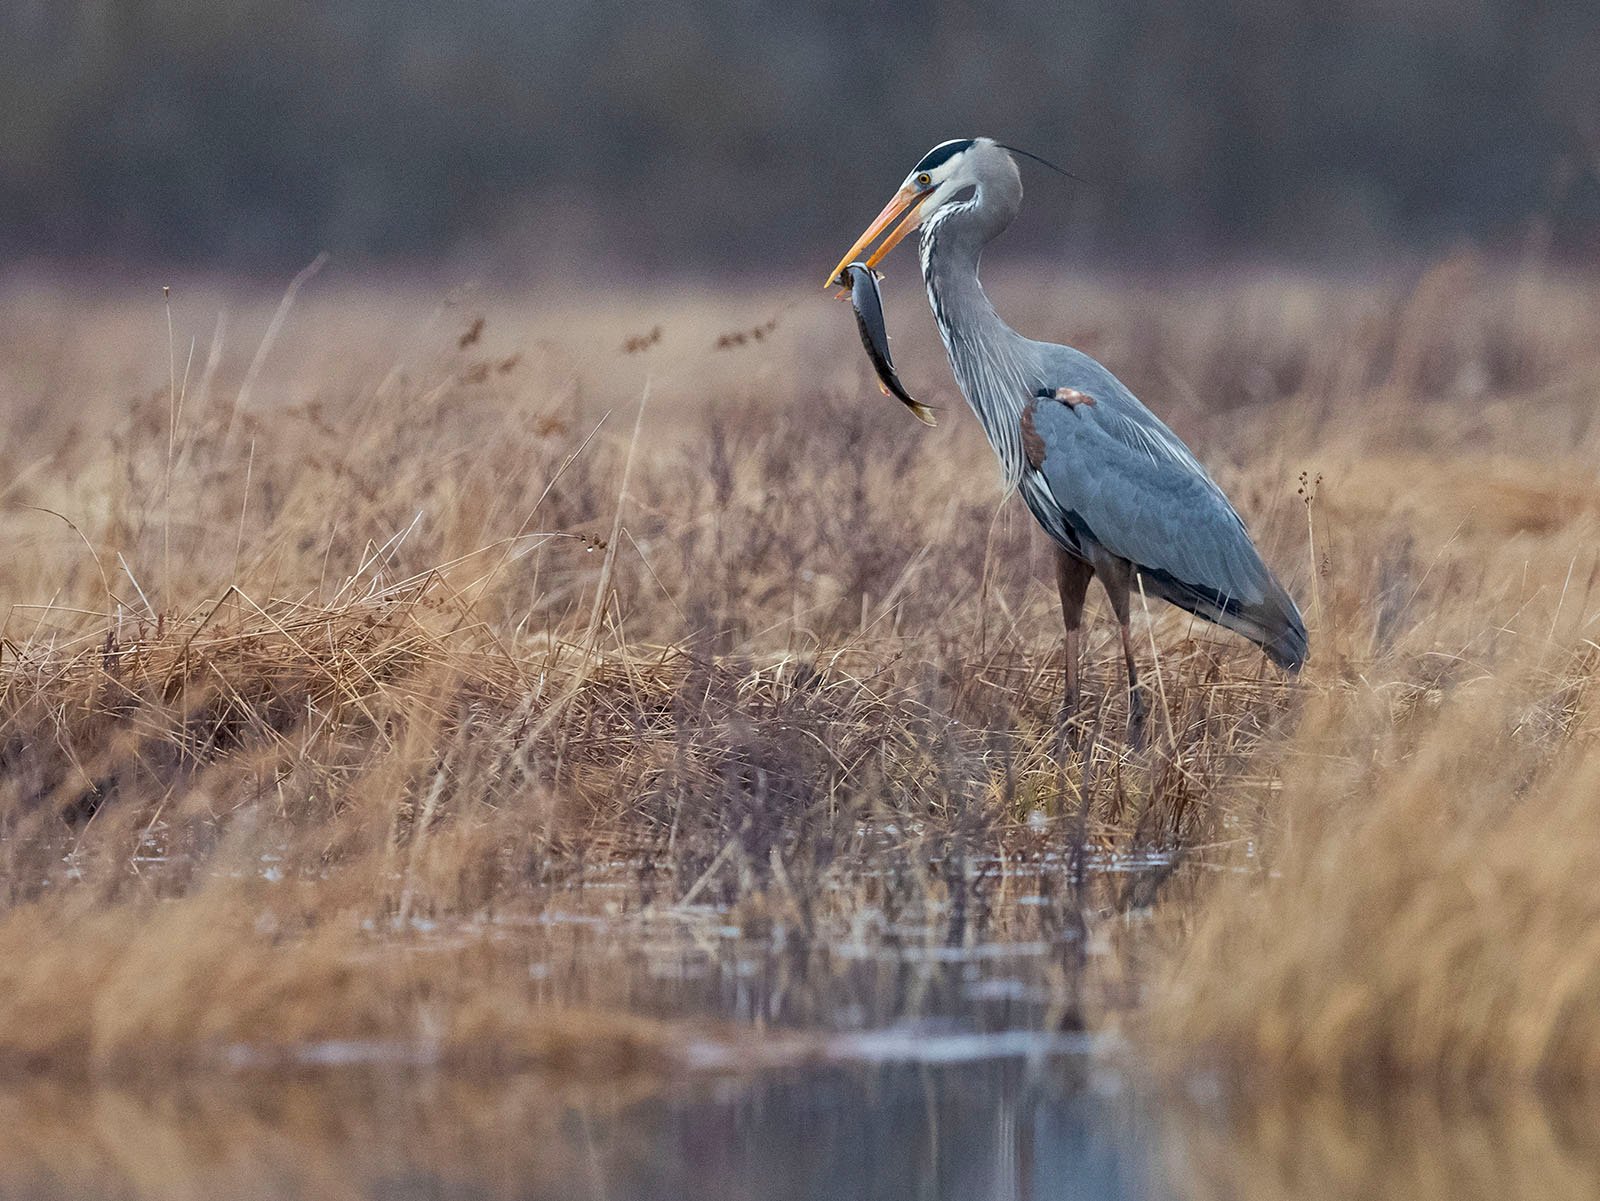 A great blue heron stands in shallow water amidst tall, dry grasses, with a fish caught in its beak, in a tranquil marshland setting.